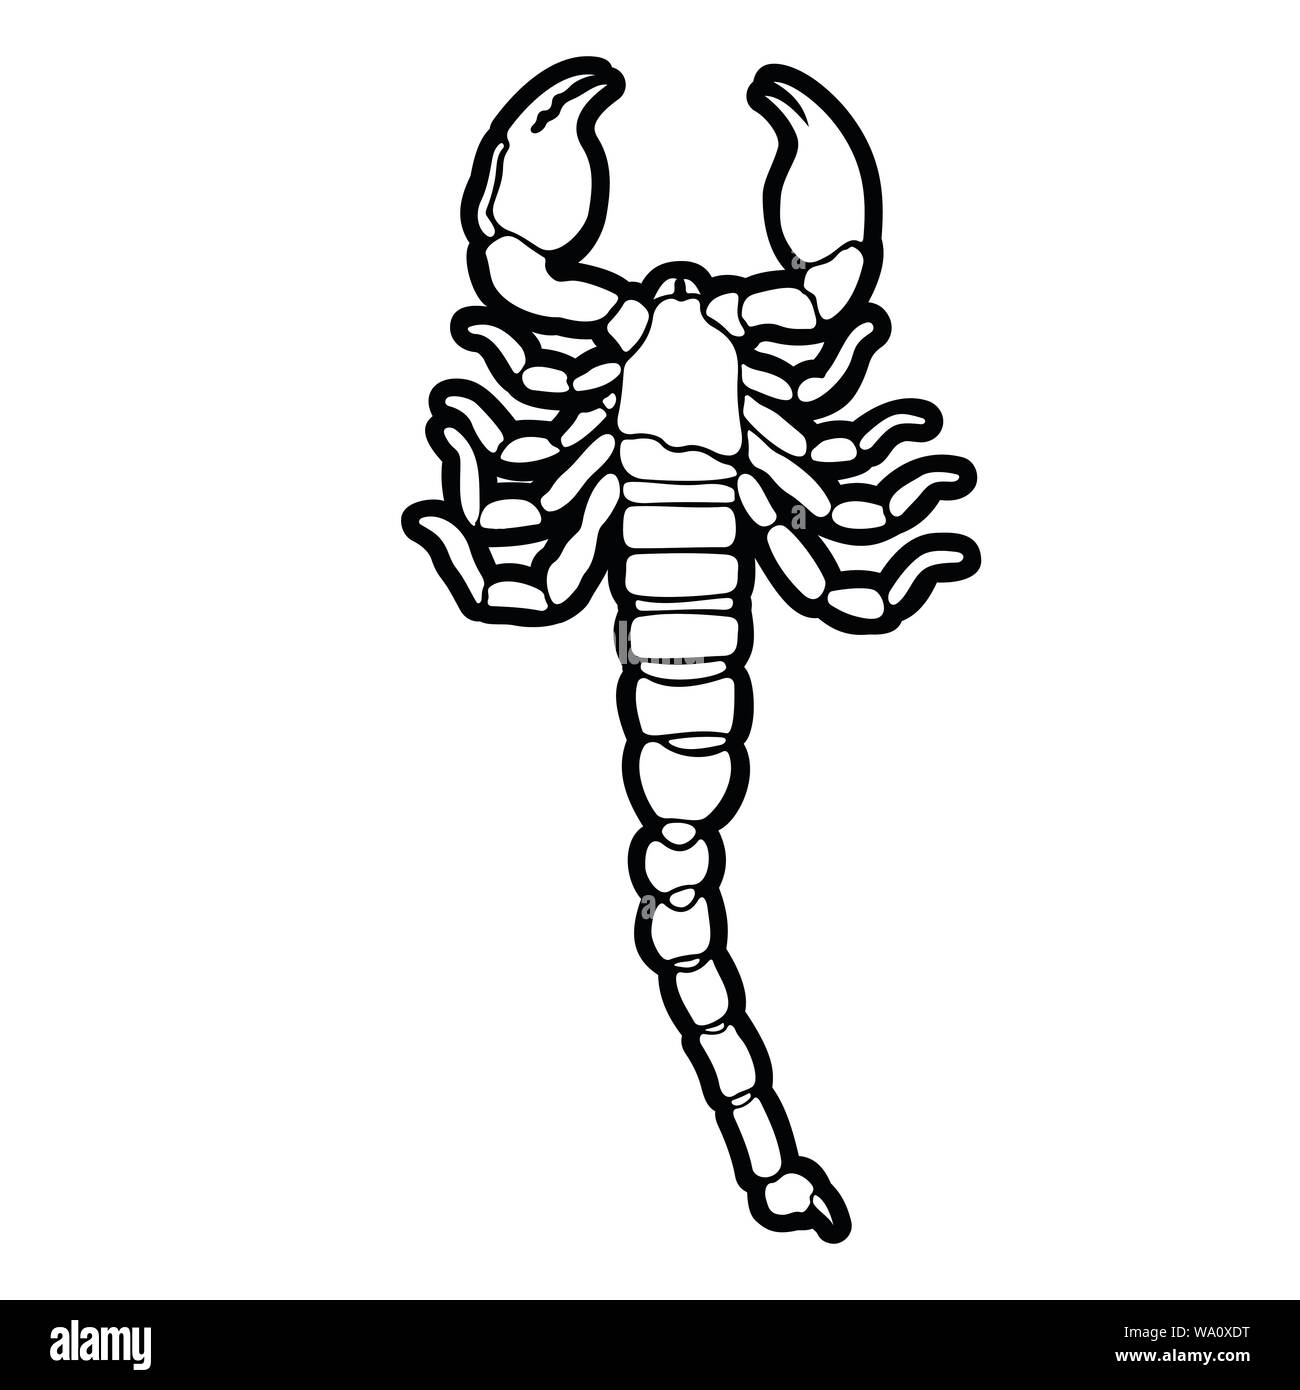 How to Draw a Scorpion  Tribal Tattoo Design Style  YouTube